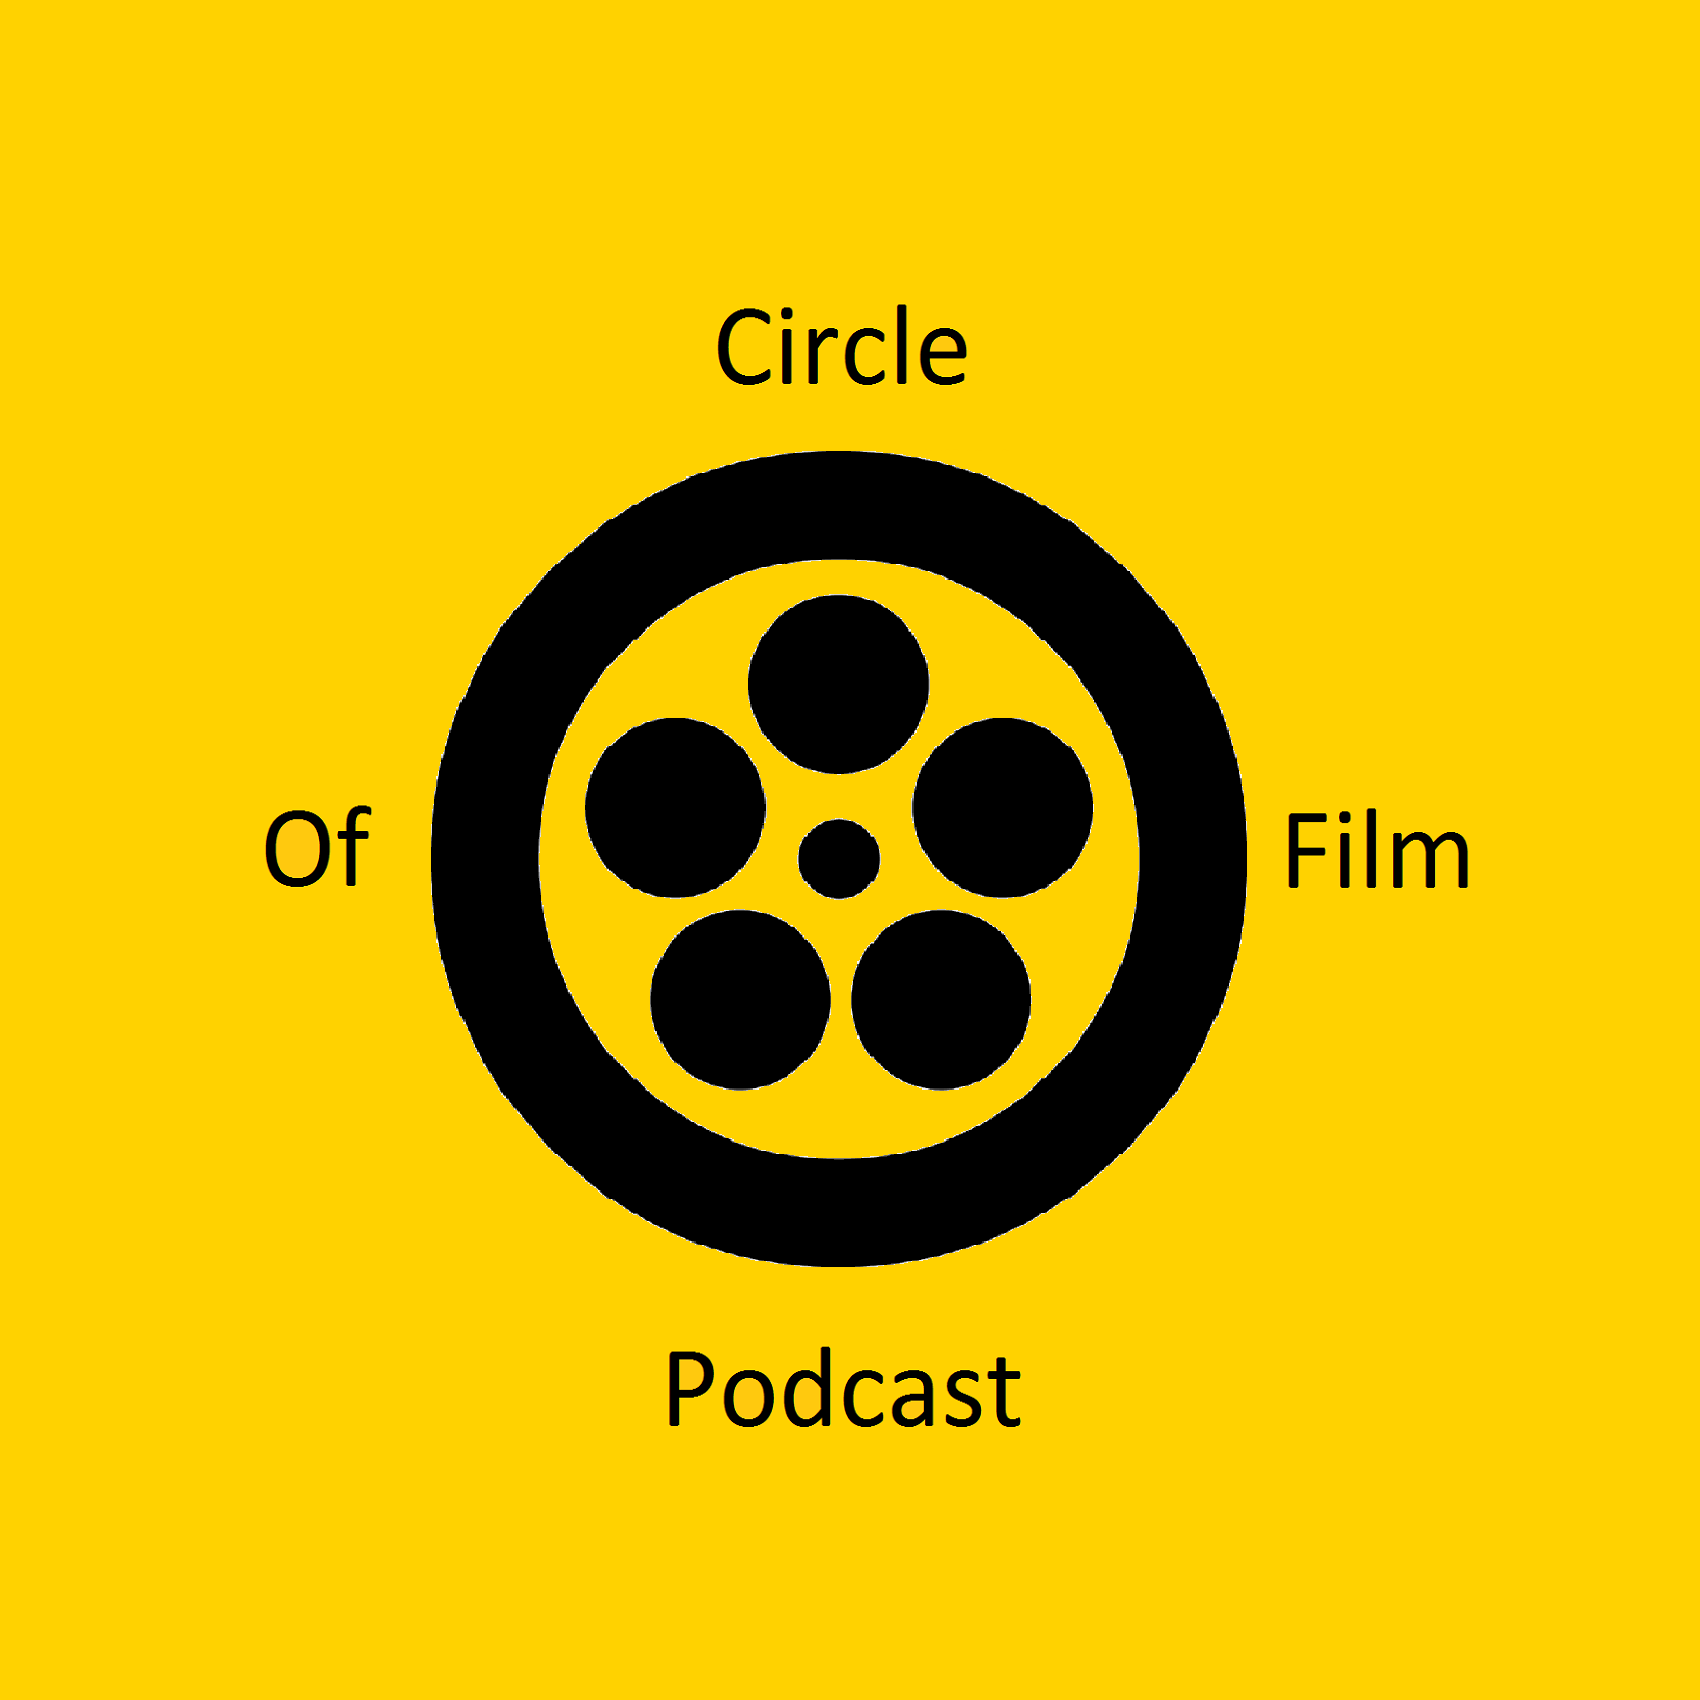 The Circle of Film Podcast artwork